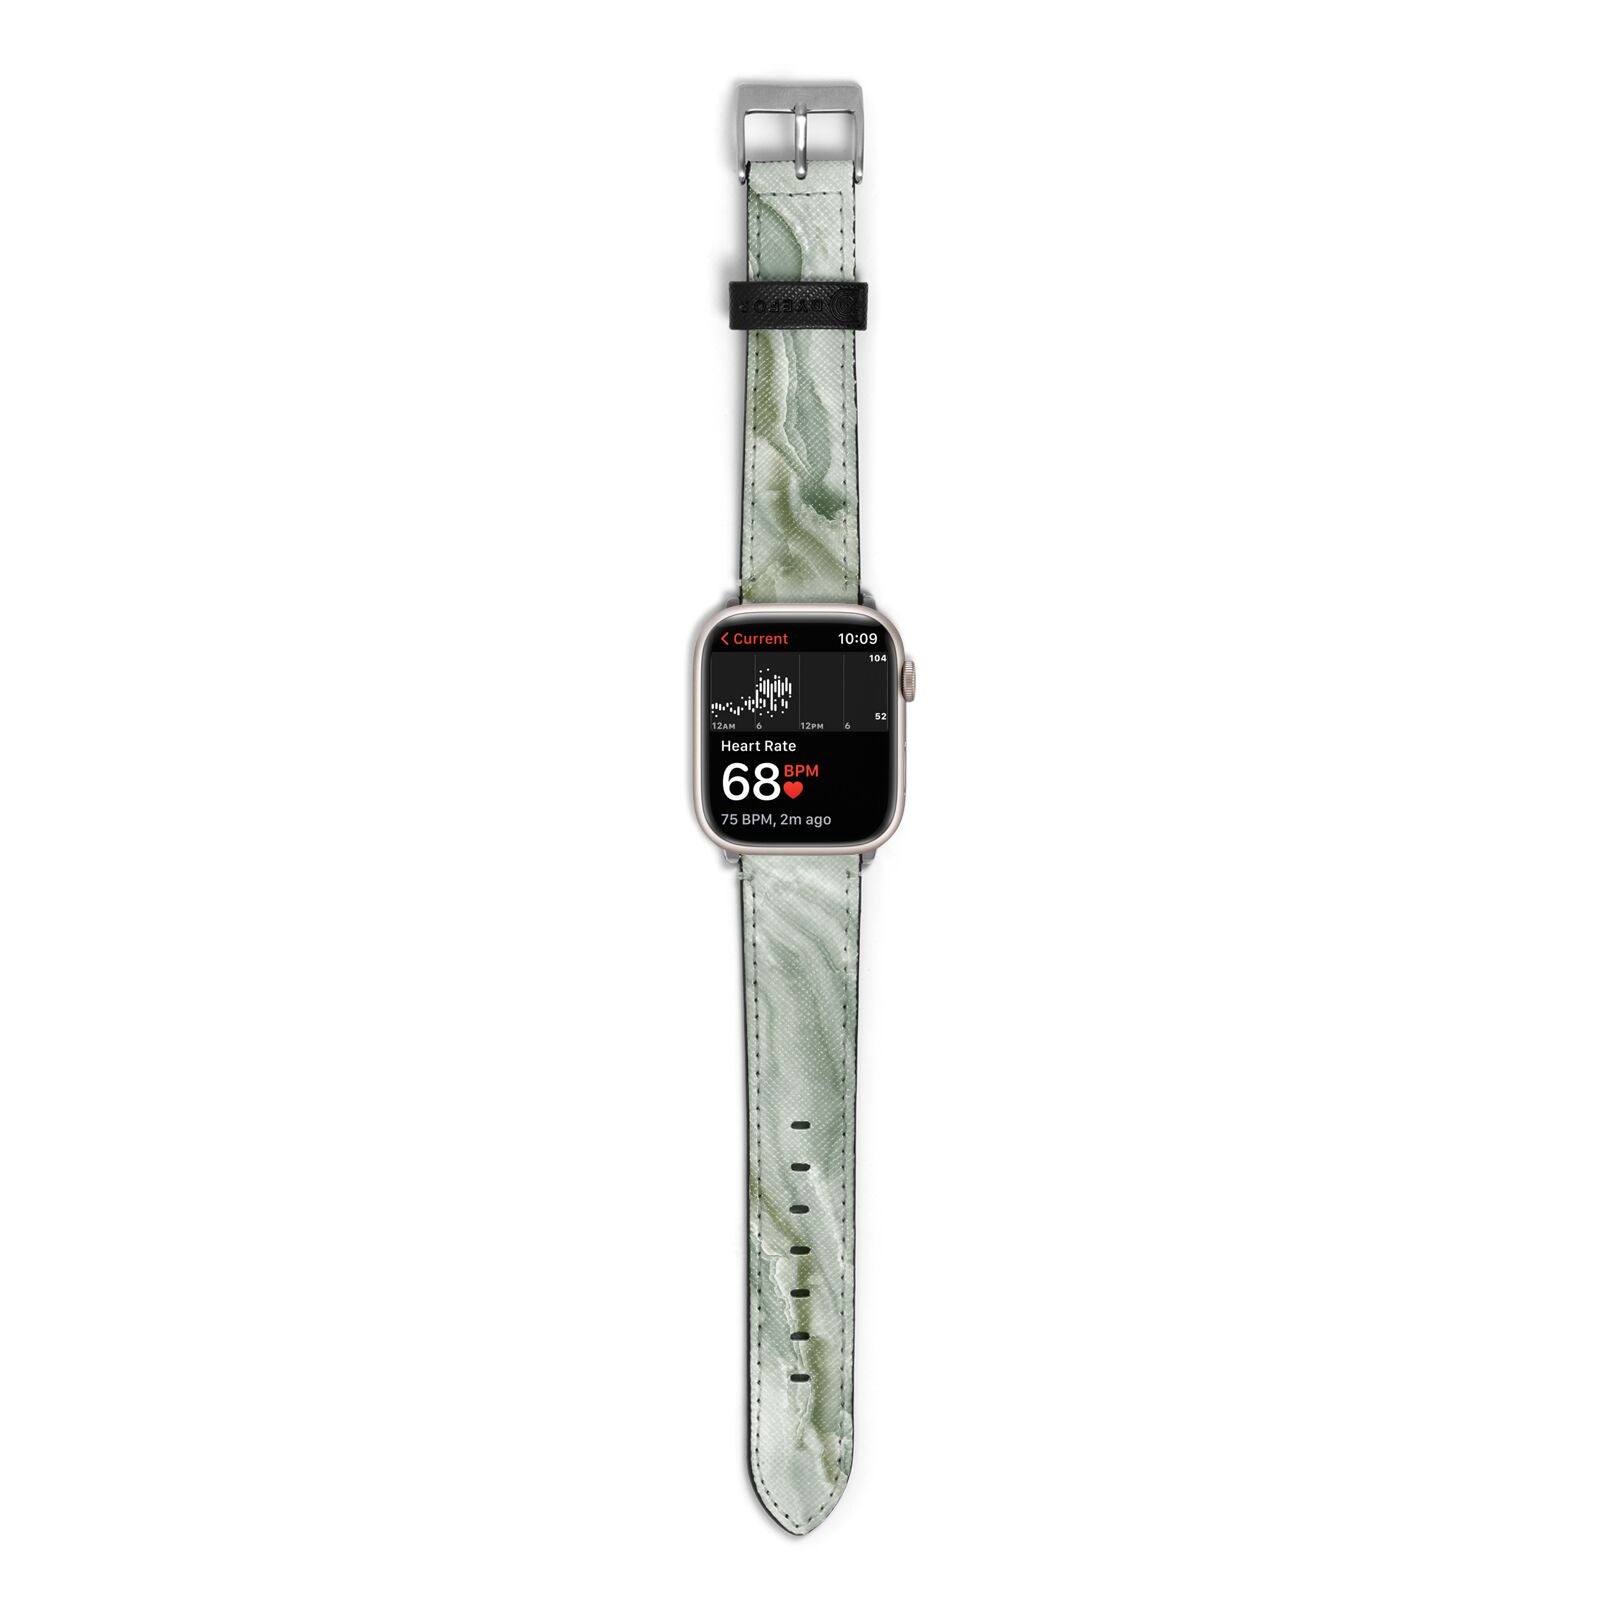 Pistachio Green Marble Apple Watch Strap Size 38mm with Silver Hardware